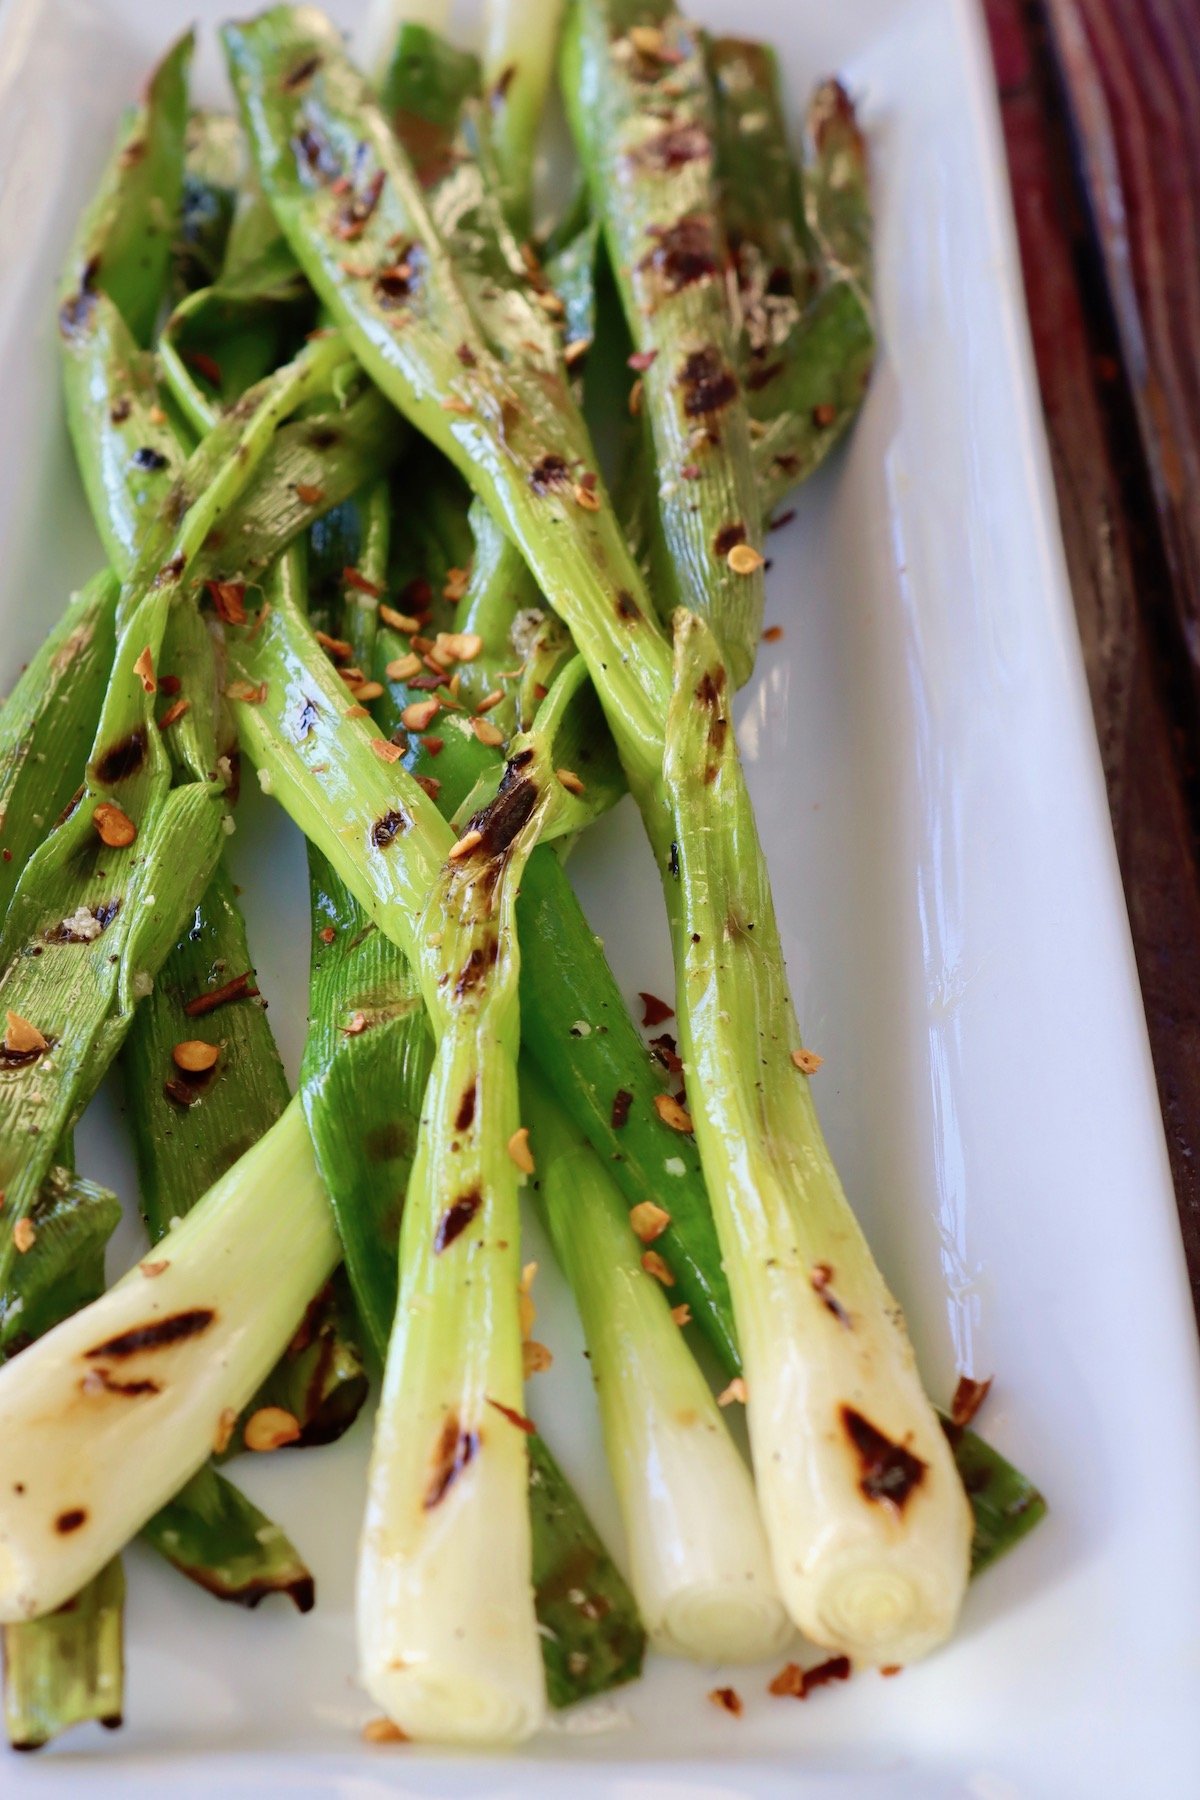 Several grilled scallions on a white plate